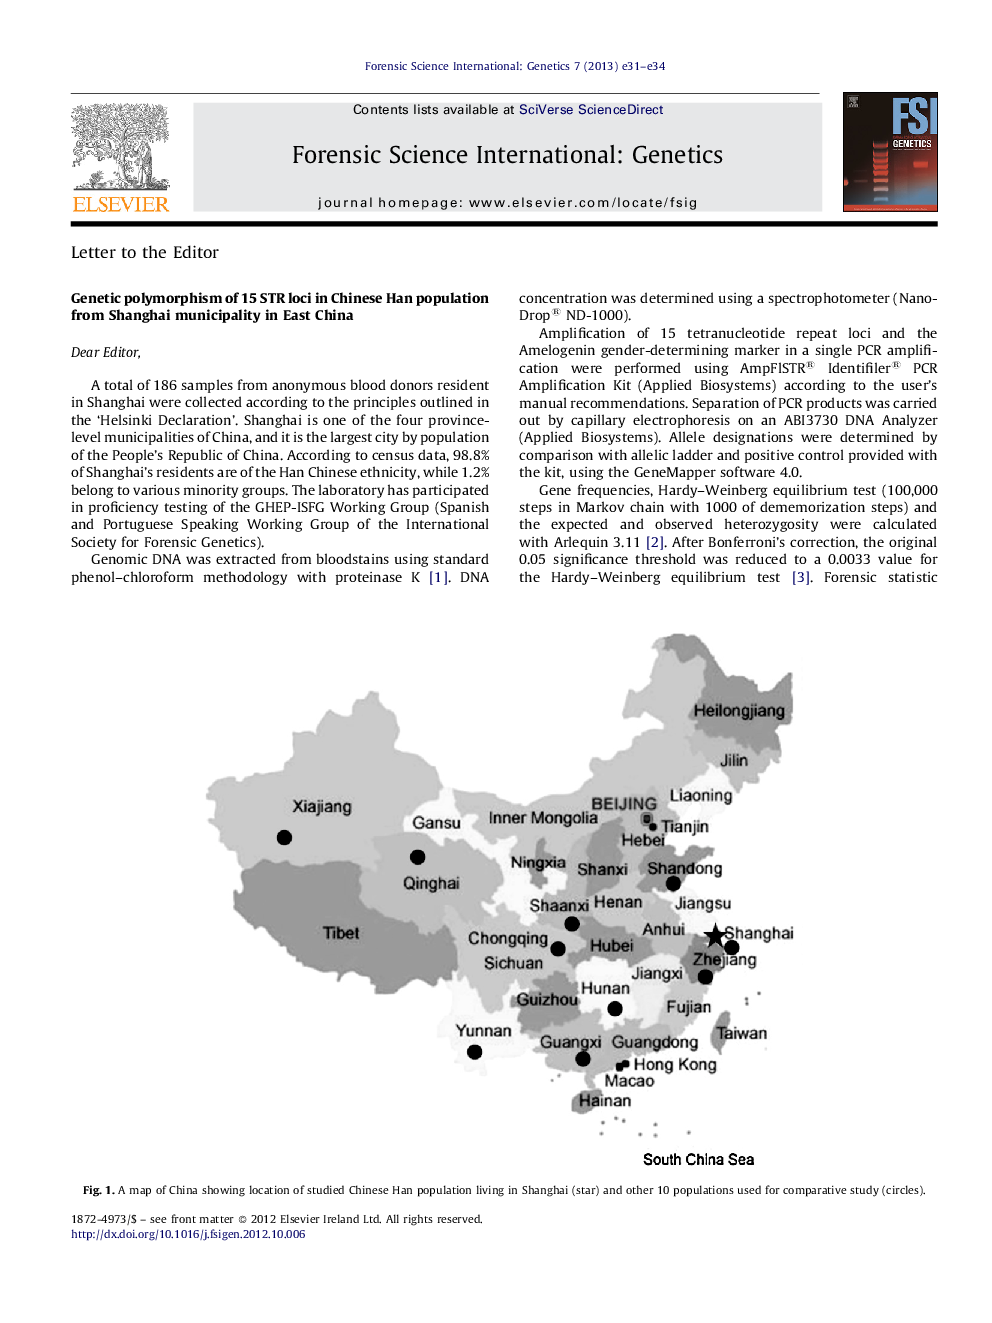 Genetic polymorphism of 15 STR loci in Chinese Han population from Shanghai municipality in East China